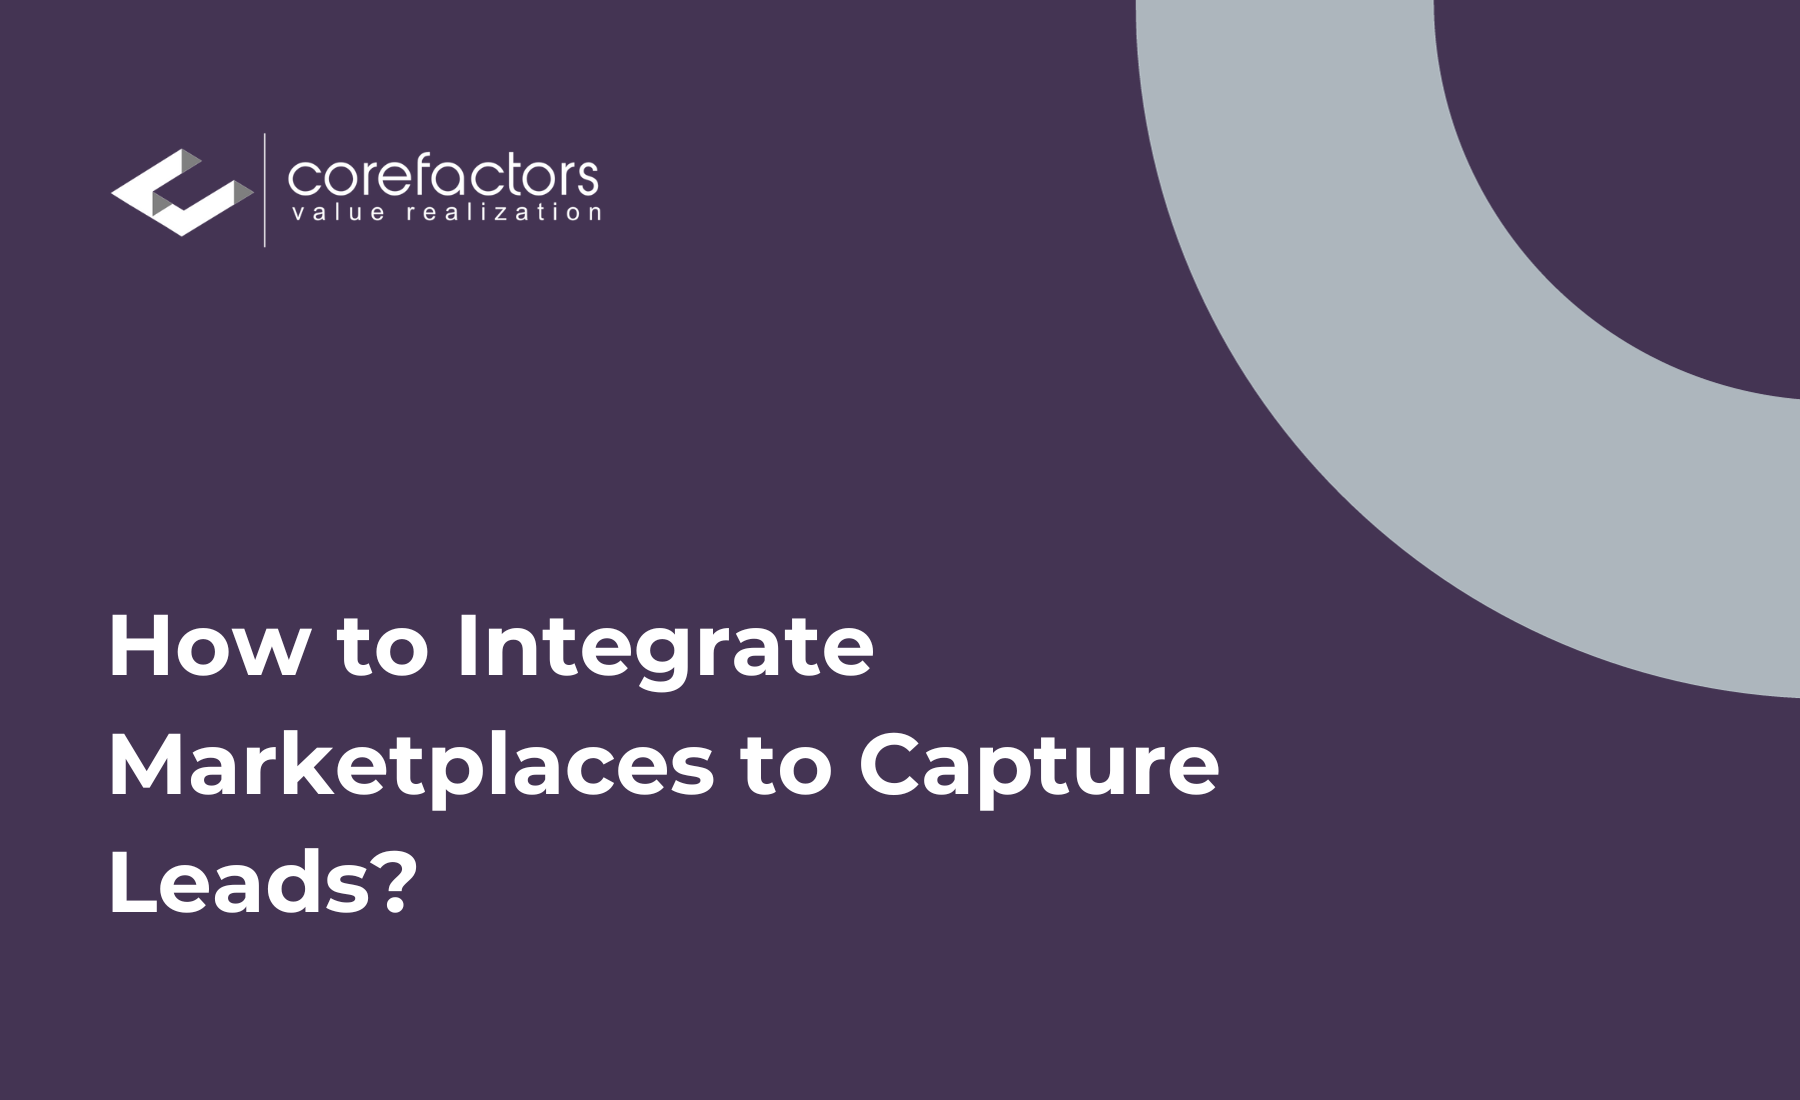 How to integrate marketplaces with the CRM to capture leads?